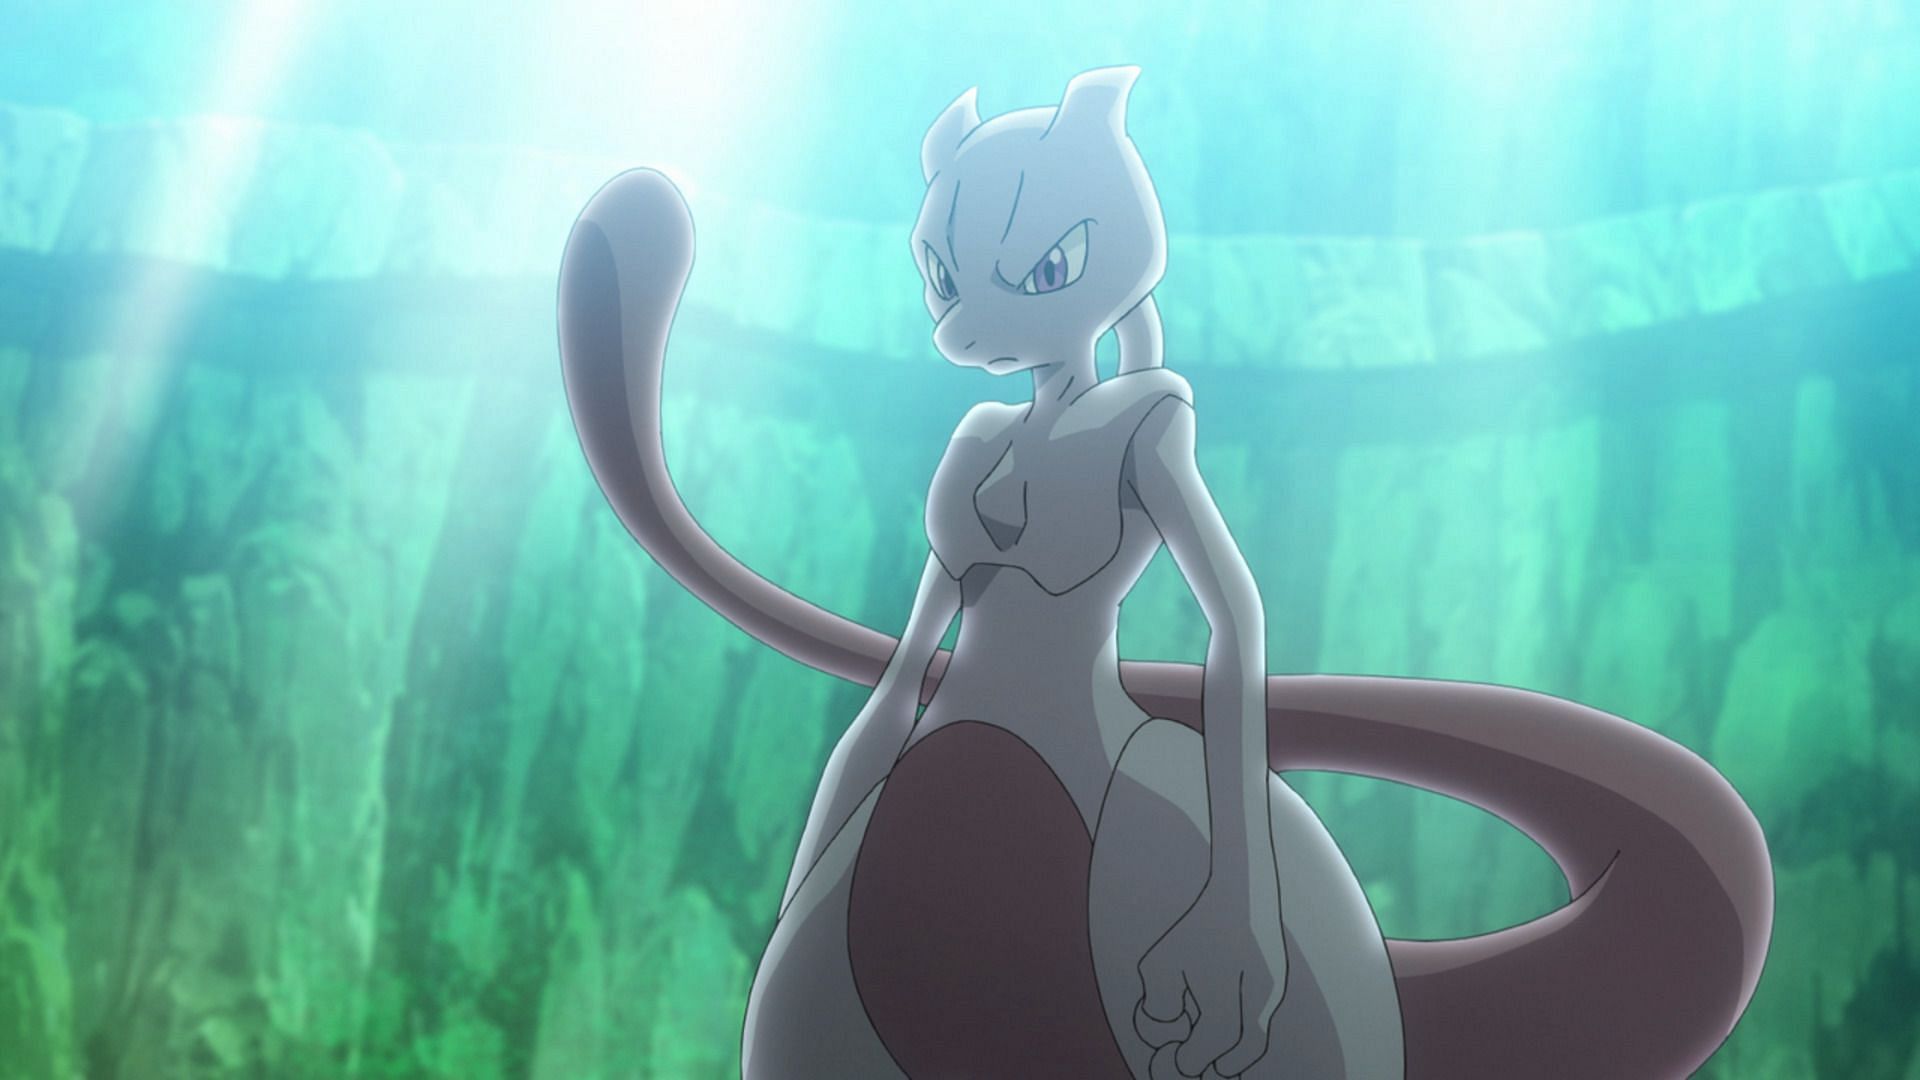 Mewtwo as it appears in the anime (Image via The Pokemon Company)